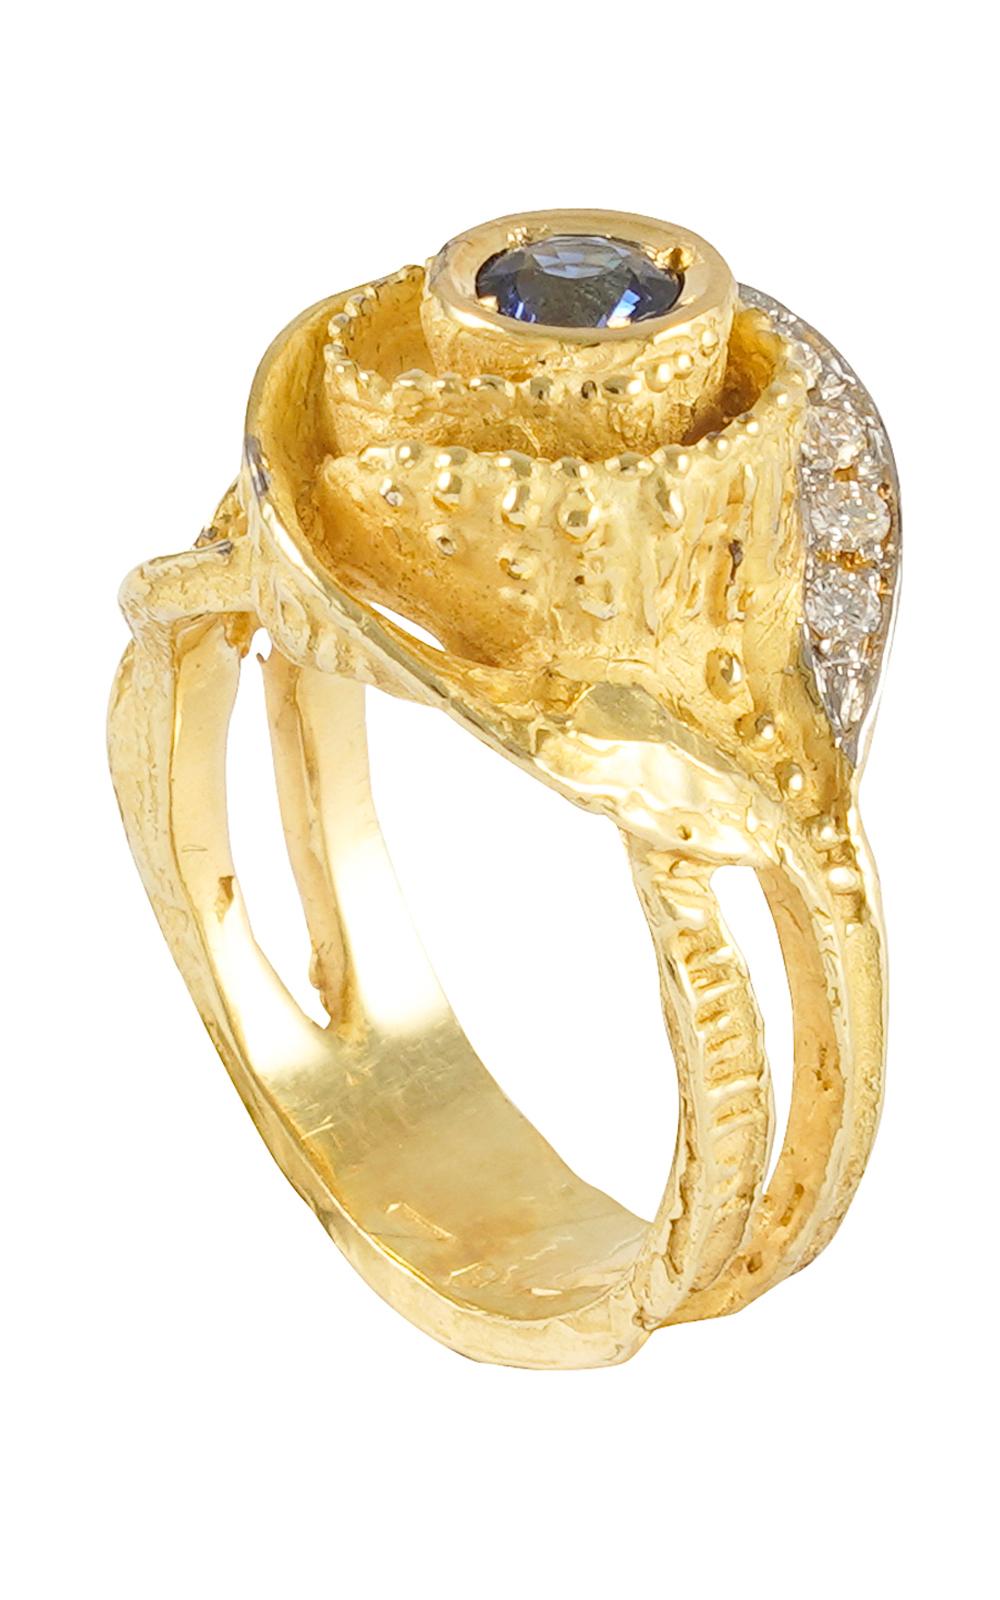 Lovely Sapphire and Diamonds Satin Yellow Gold Cocktail Ring, from Sacchi’s Desert Rose Collection, hand-crafted with lost-wax casting technique.

Lost-wax casting, one of the oldest techniques for creating jewelry, forms the basis of Sacchi's